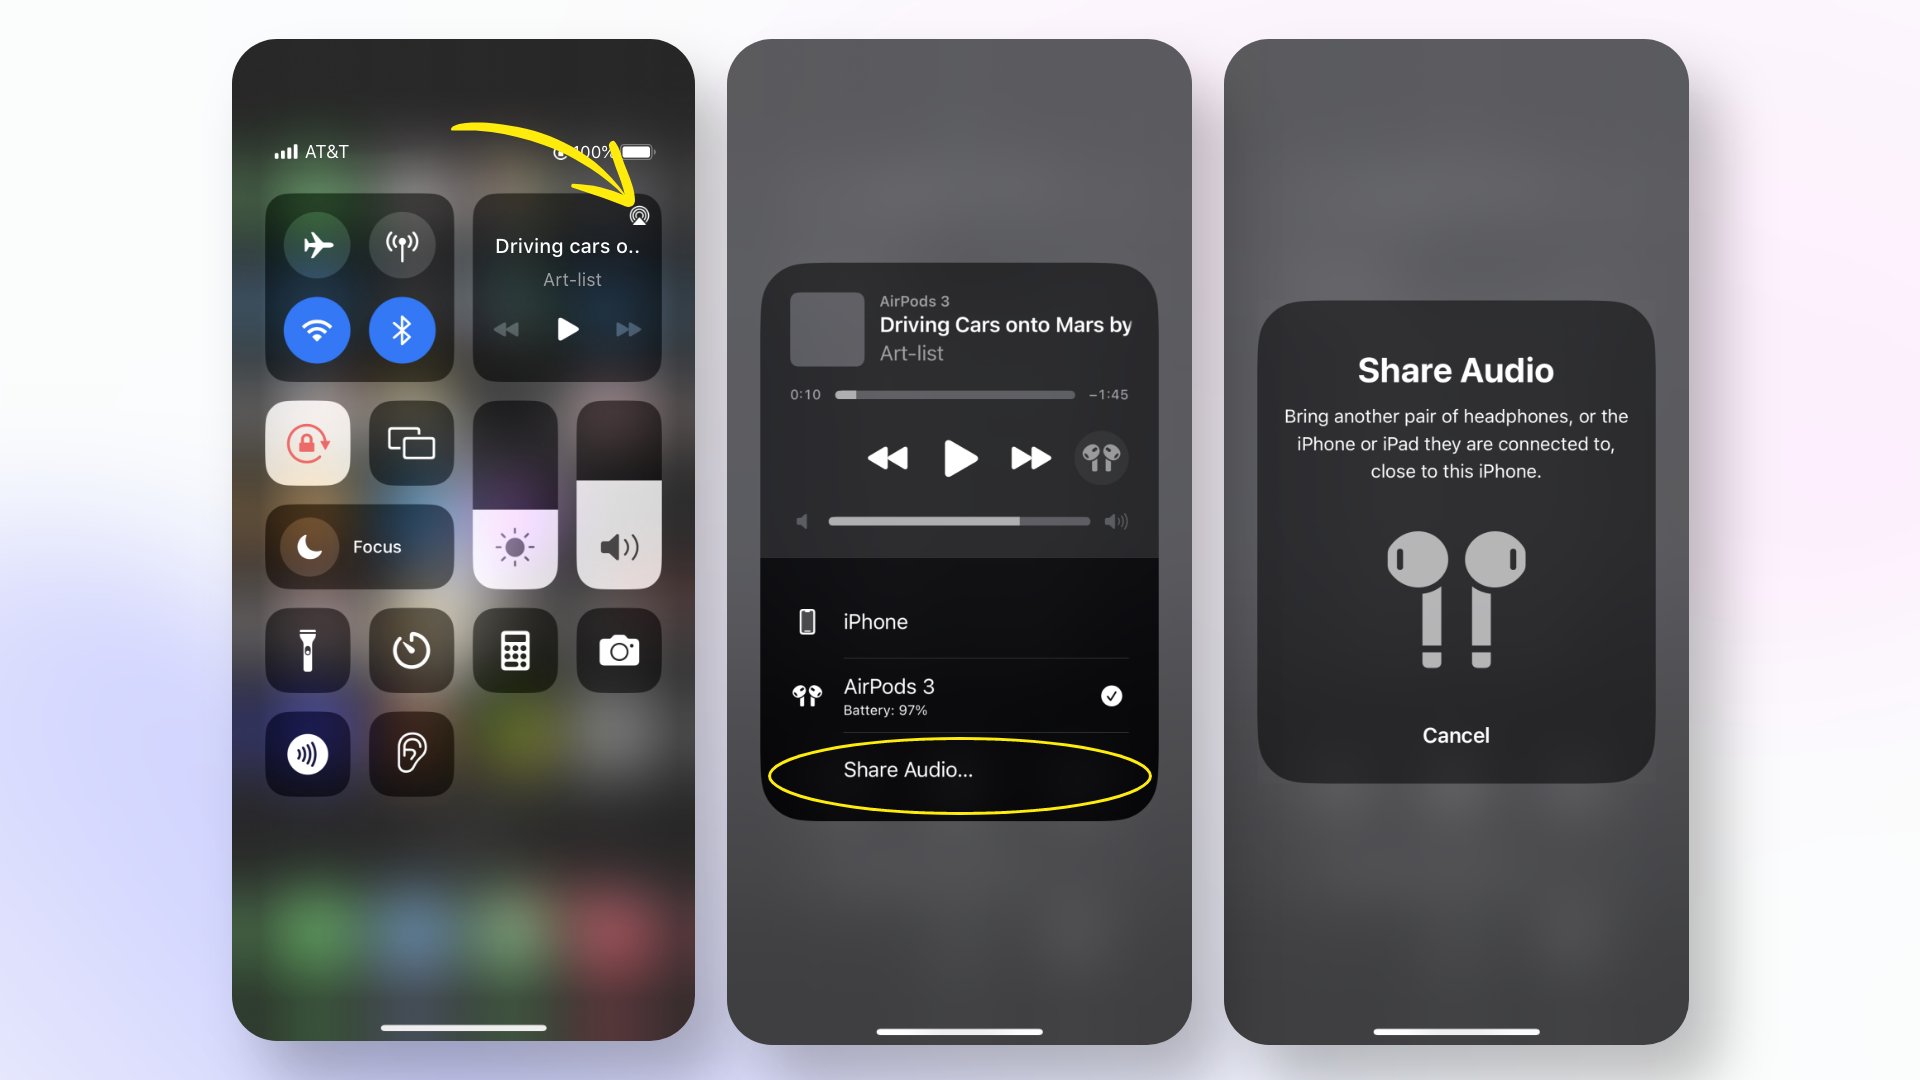 Share audio on AirPods